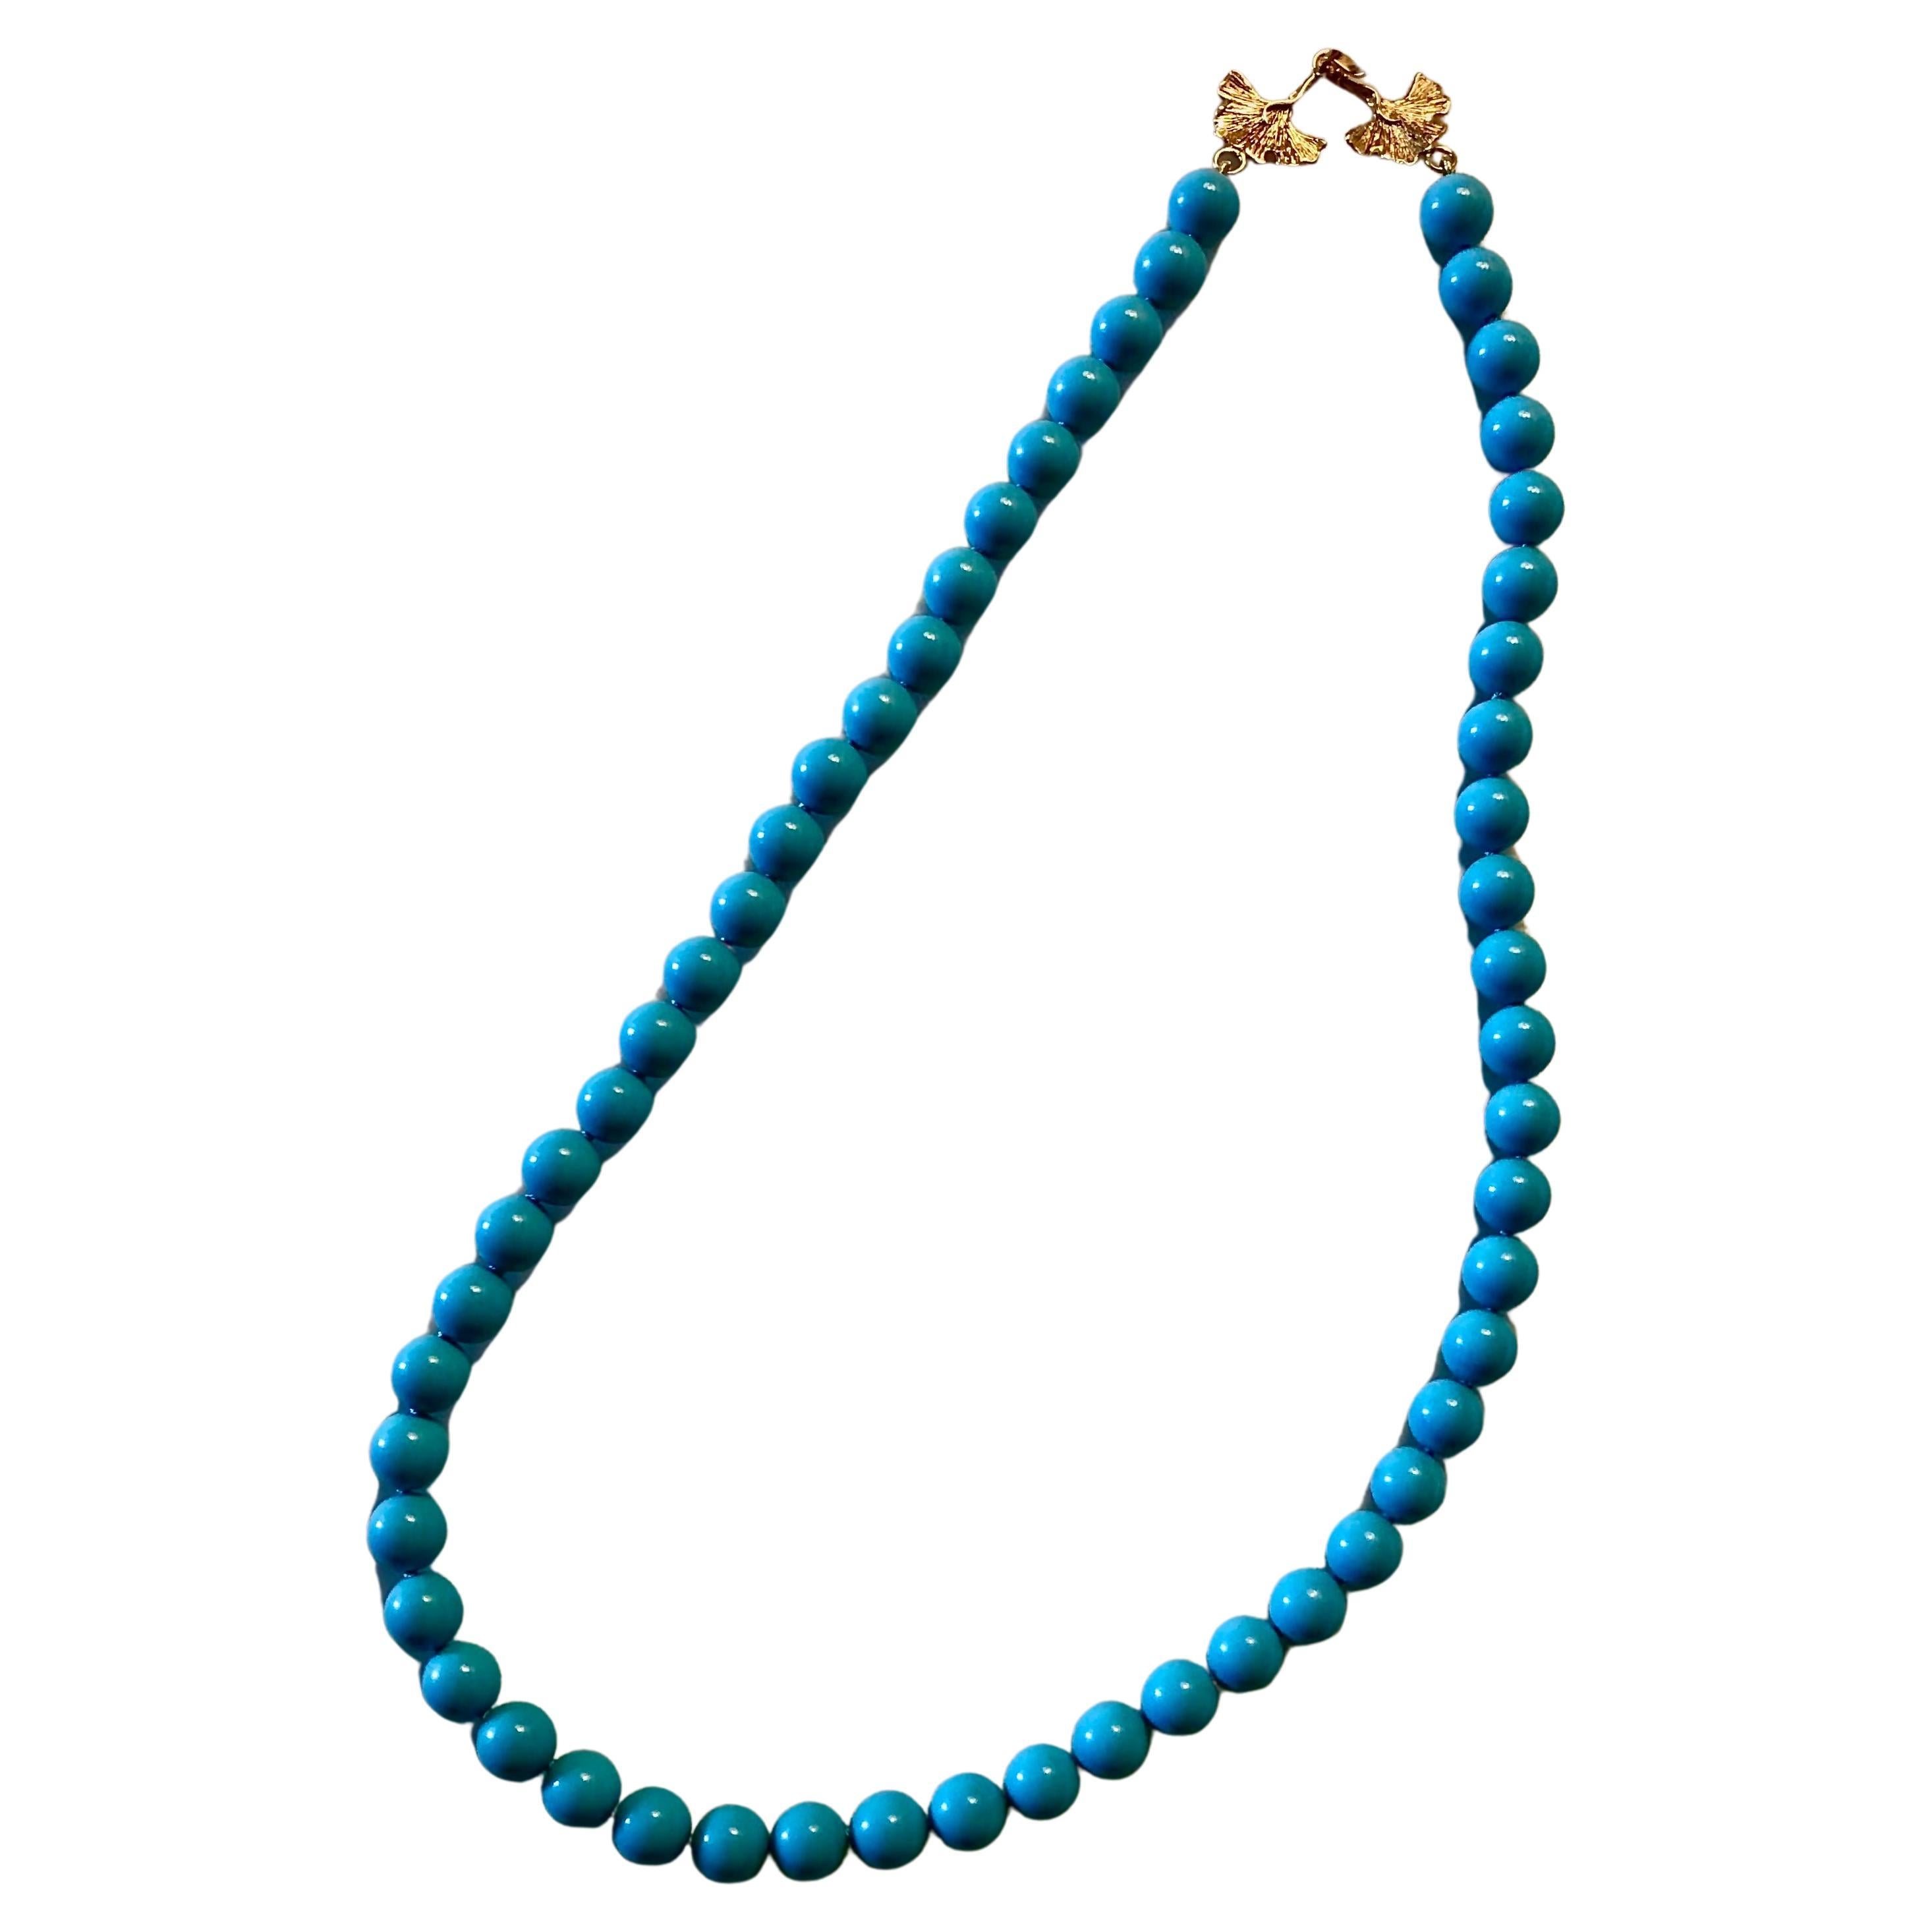 Sleeping beauty turquoise beads with 14kt gold clasp